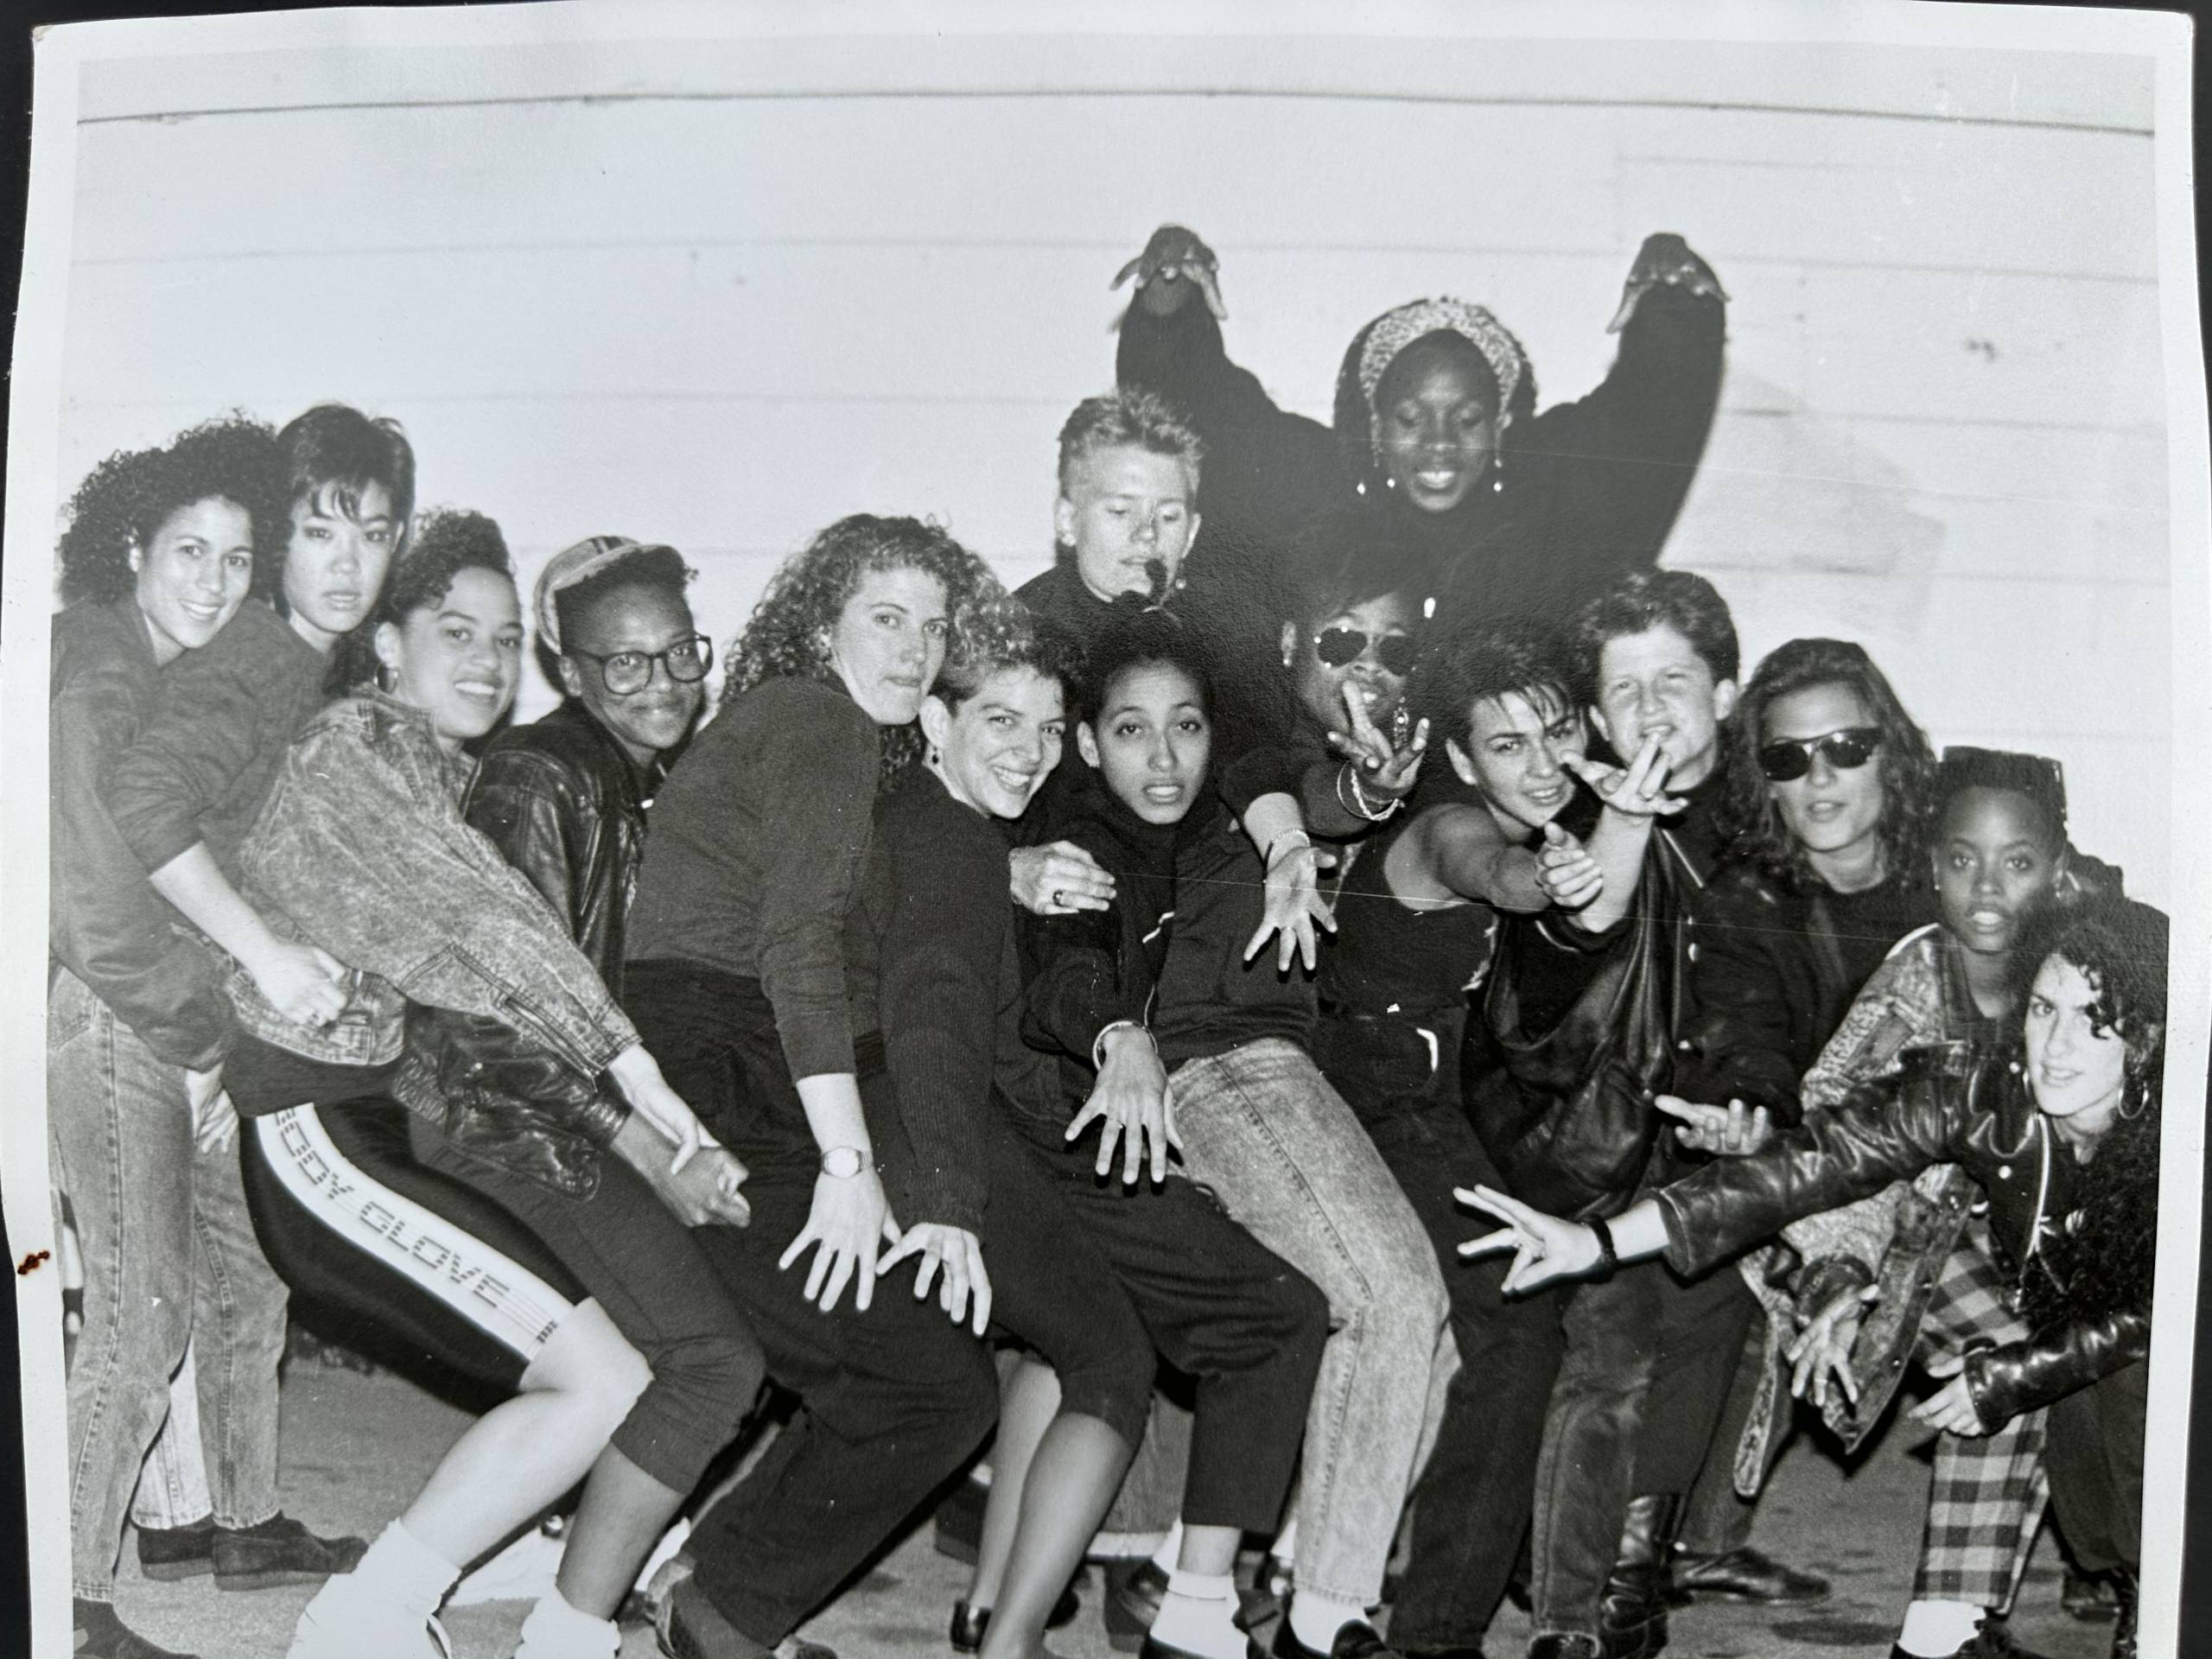 A black-and-white photo of a diverse group of women posing together. 